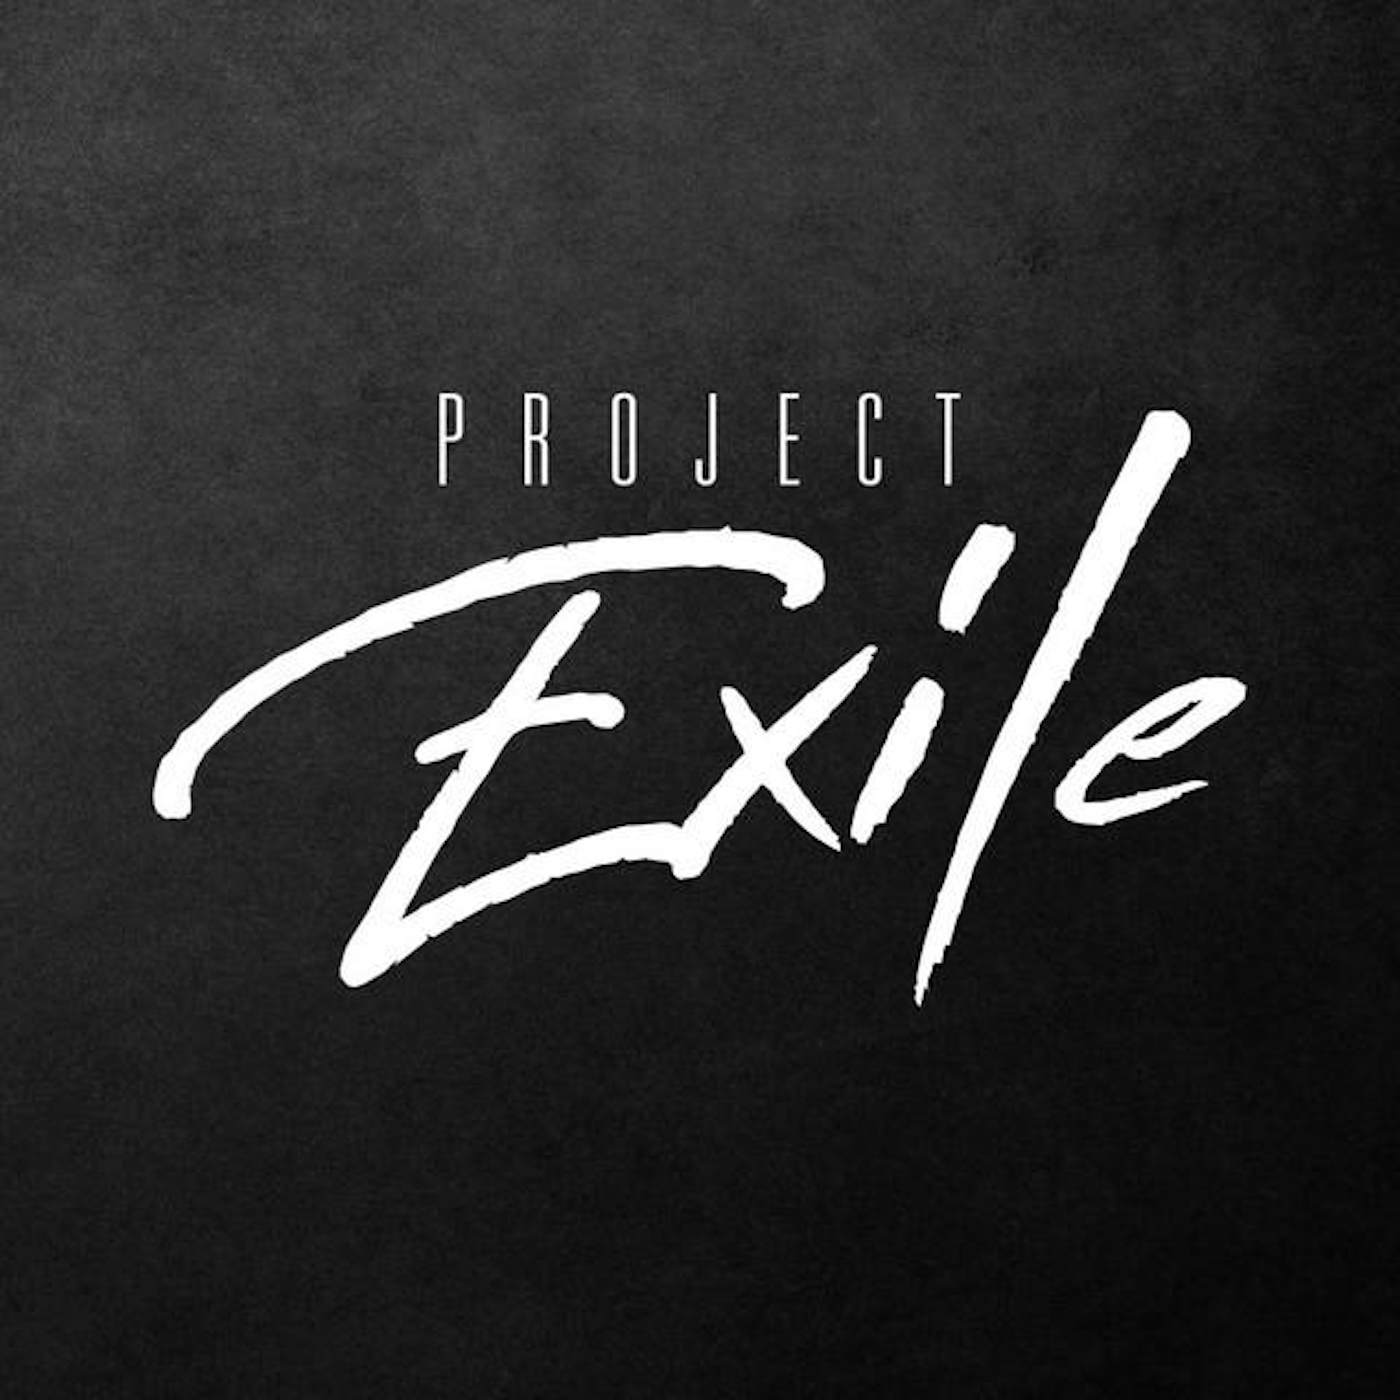 Project Exile